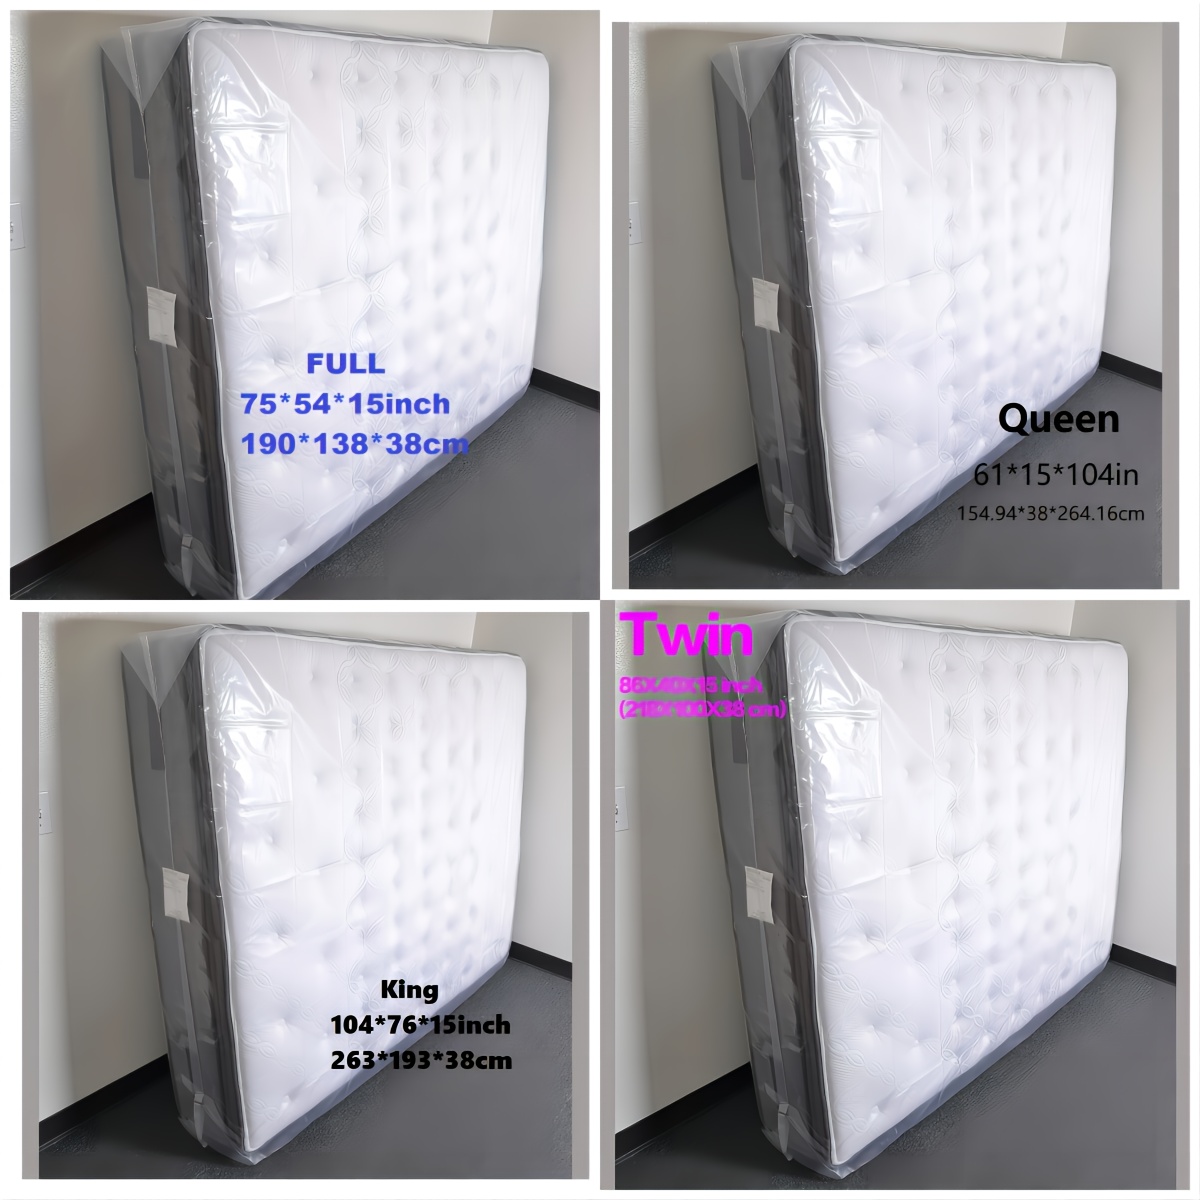 

Ultra-durable 2mil Mattress Protector Bag - Tear & Puncture Resistant, Reinforced Polyethylene Cover For King, Queen, Twin, Full Sizes - Ideal For Moving & Long-term Storage